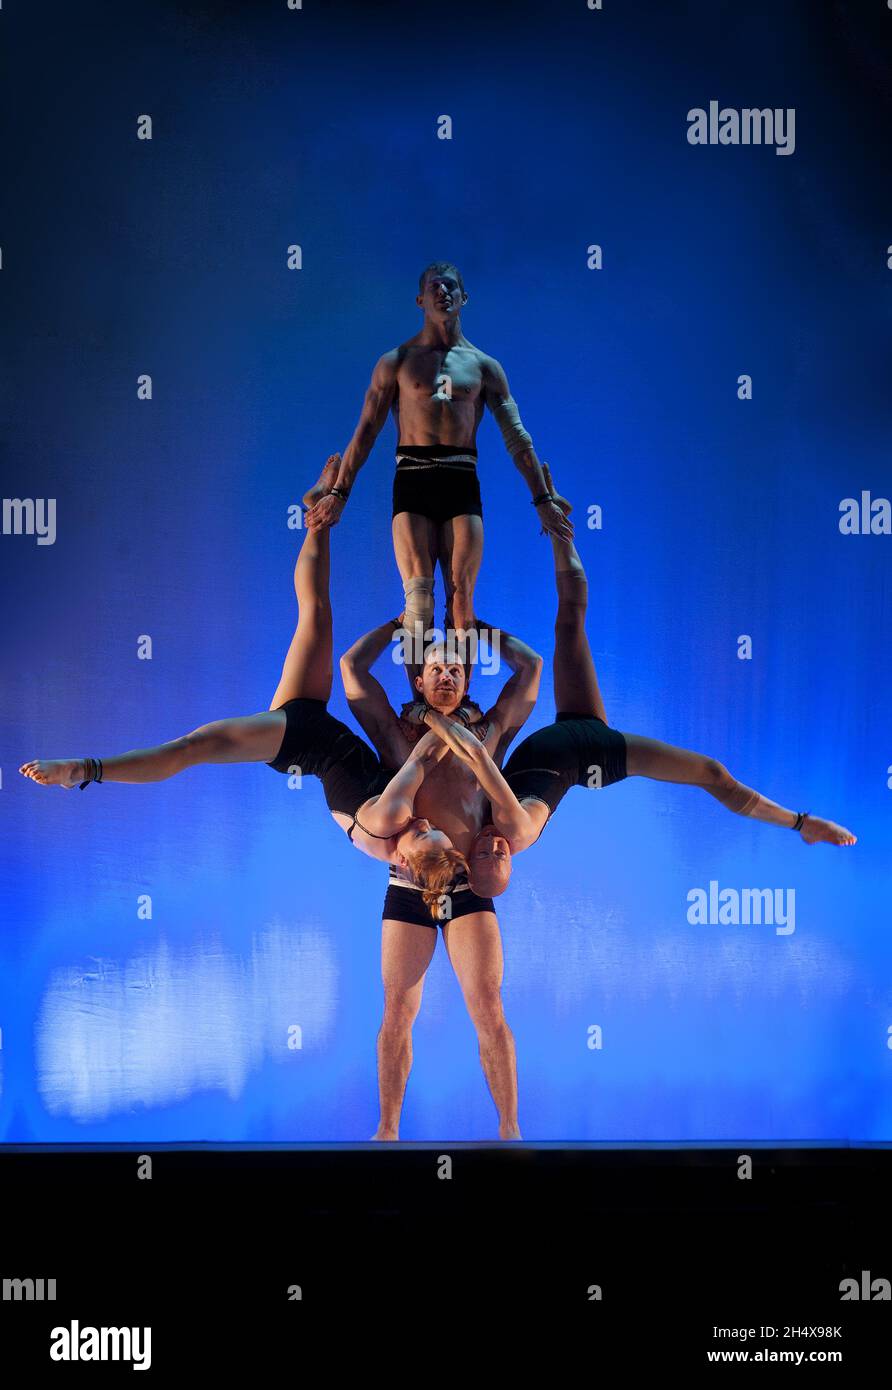 Memebers of dance/acrobatic company Circa performing during Wings of Desire, closing performance International Dance Festival, at Victoria Square in Birmingham Stock Photo - Alamy